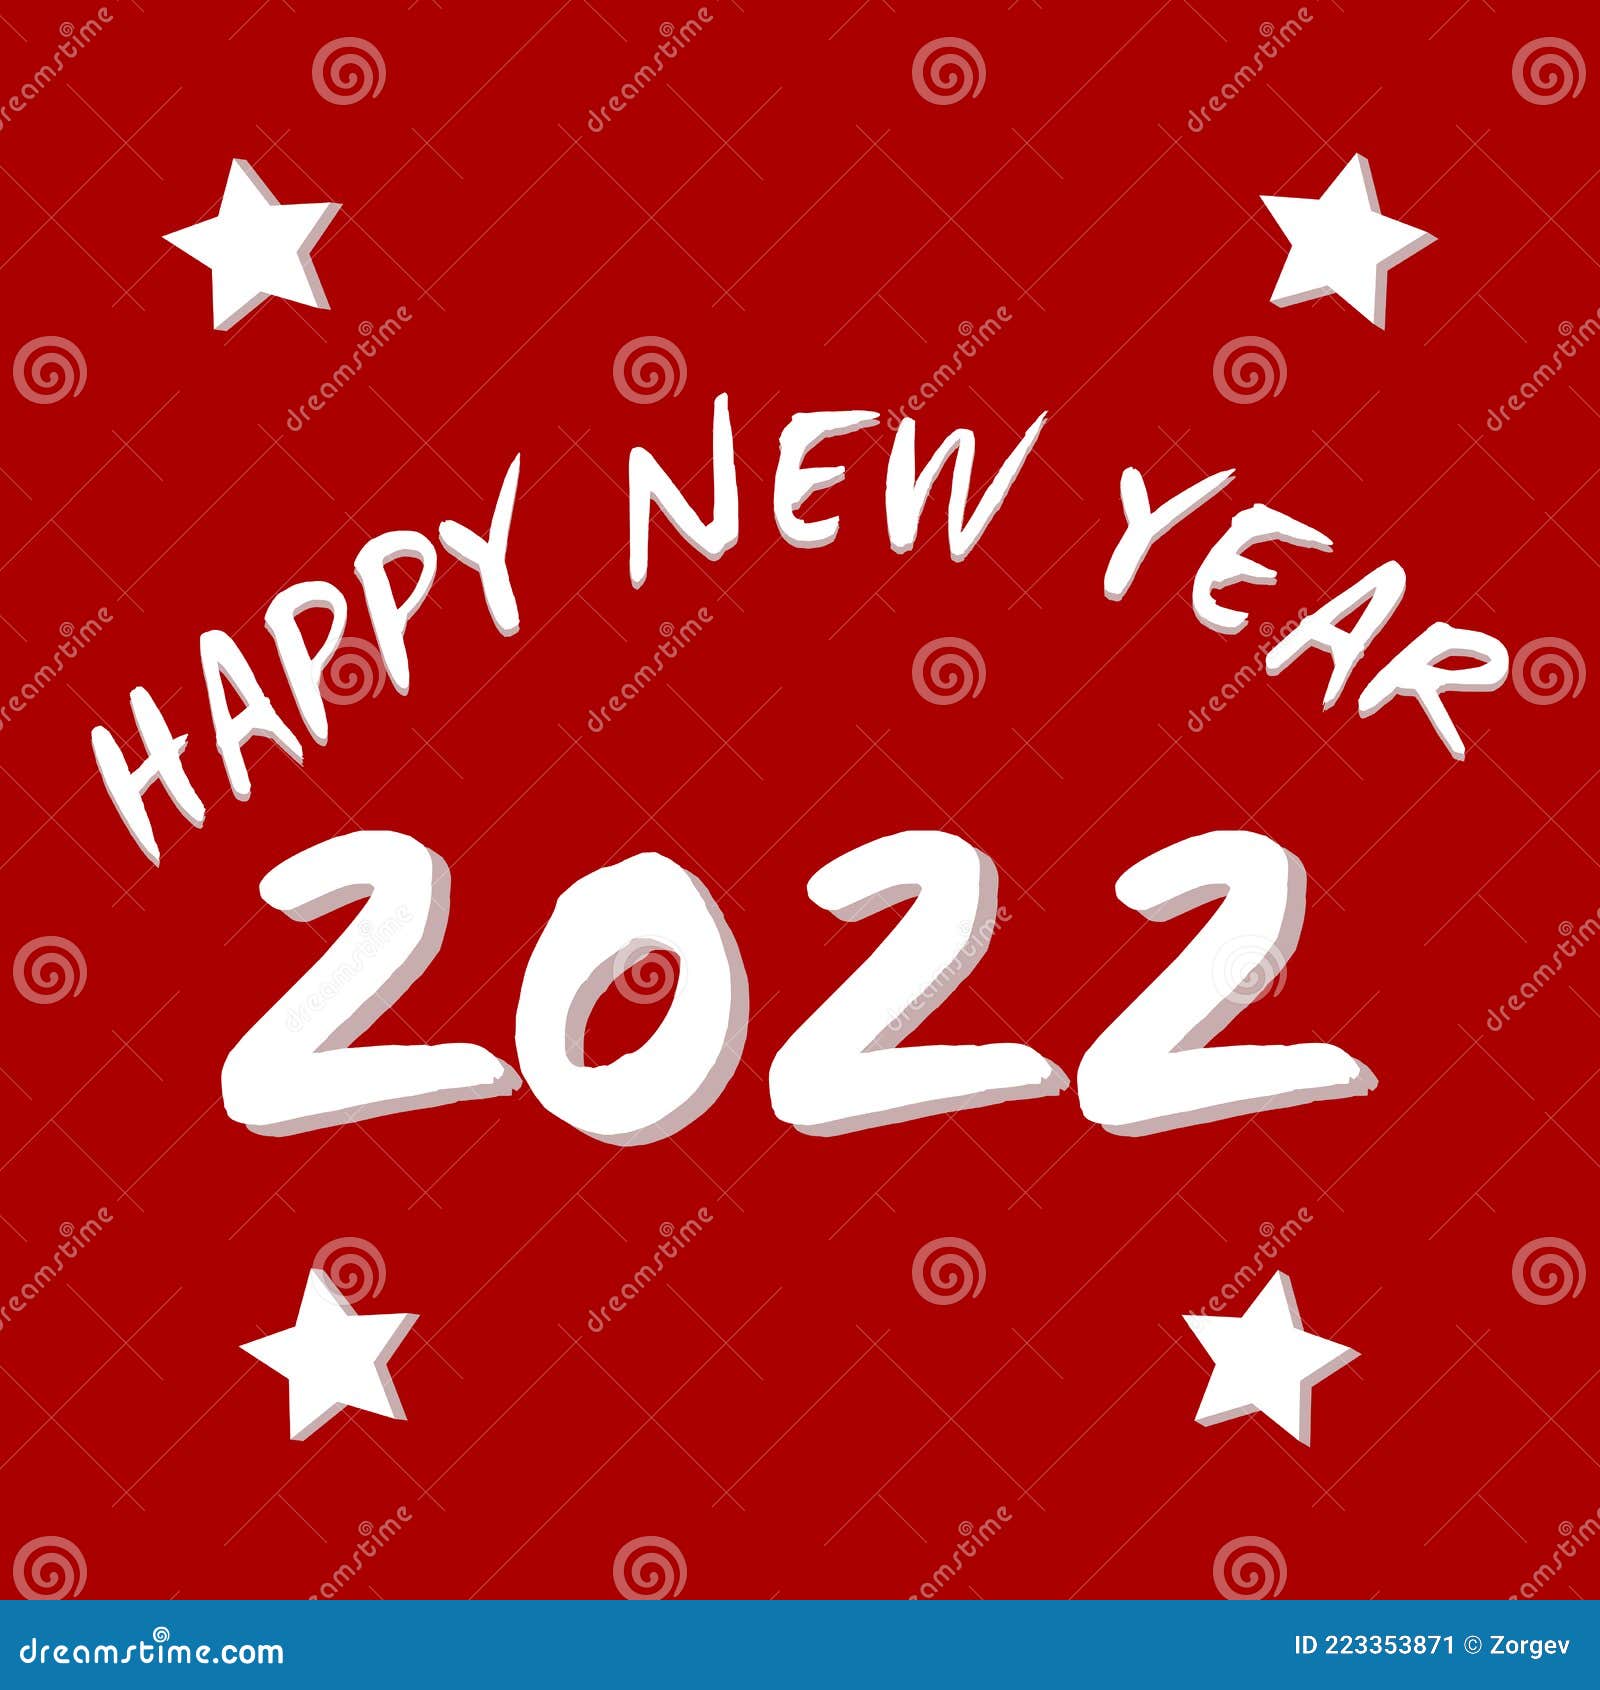 Simple Illustration of a Happy New Year 2022 White Text on Red Background  Stock Vector - Illustration of invitation, calendar: 223353871